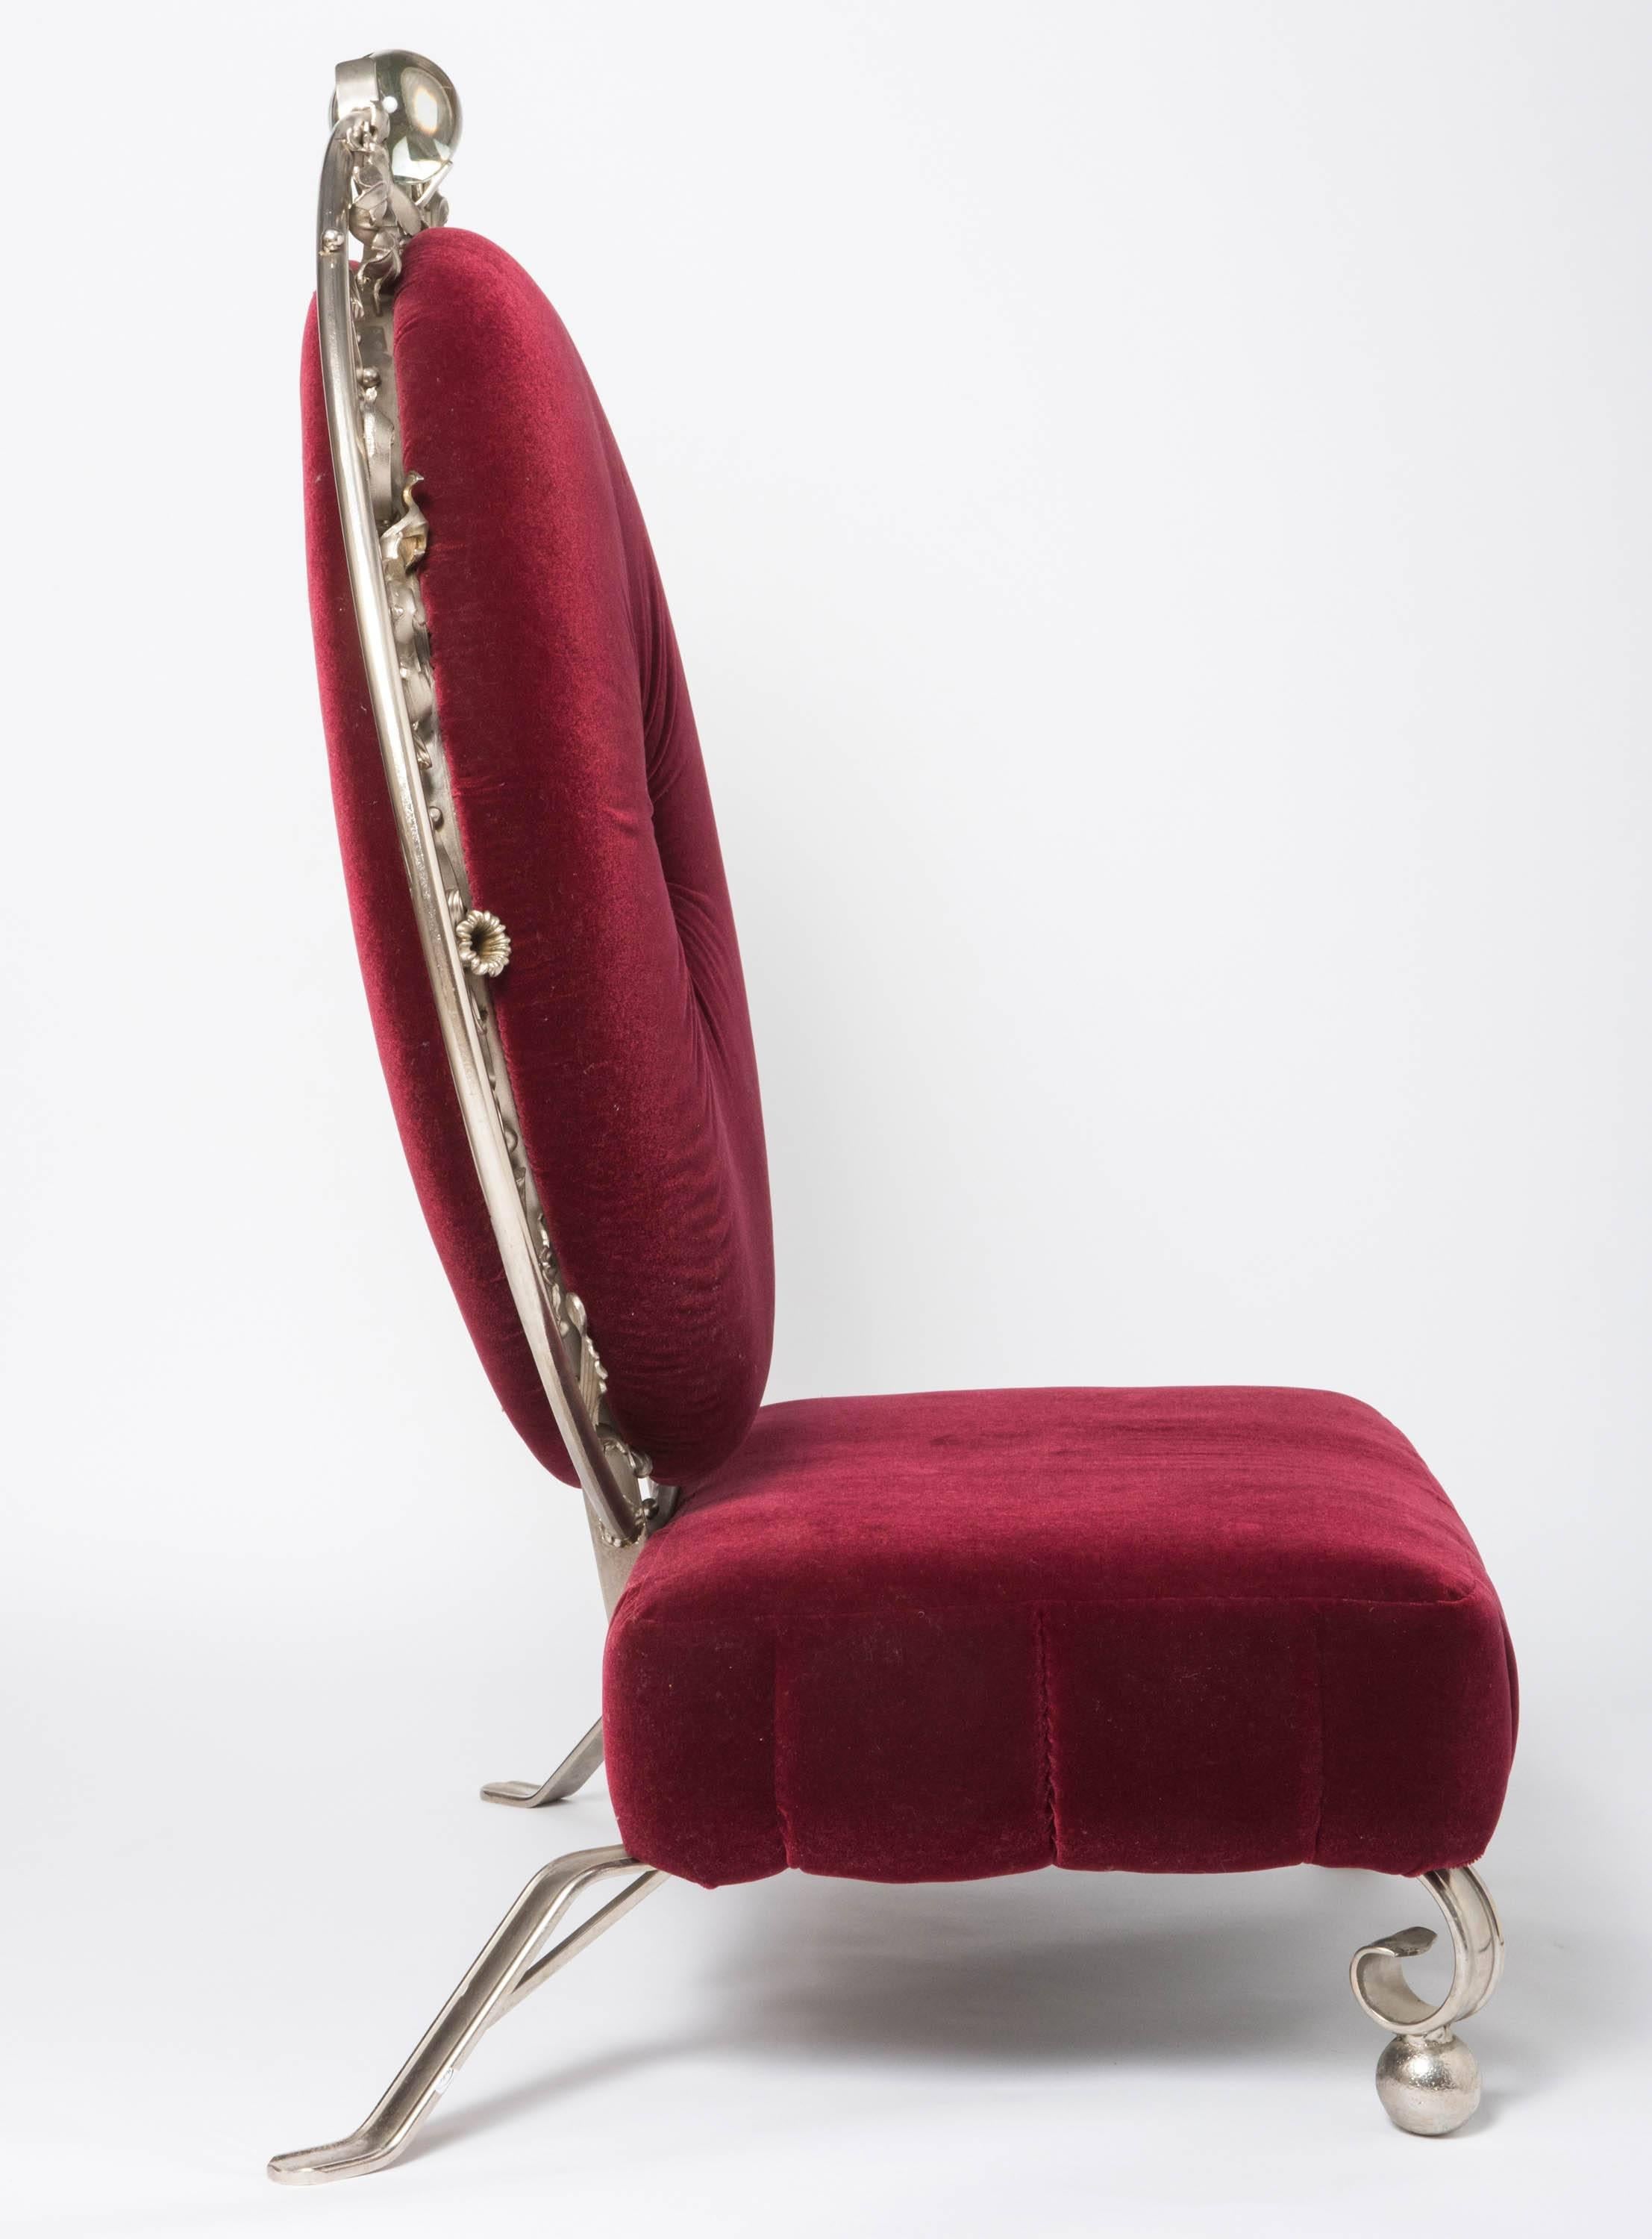 A rare pair of Throne chairs by Mark Brazier-Jones.
Commissioned by Jeffery West.
Hand-forged steel, crystal glass balls.
Covered in original Red mohair velvet.
England, circa 2010.
Measures: 142 cm high x 110 cm wide x 95 cm deep, seat height